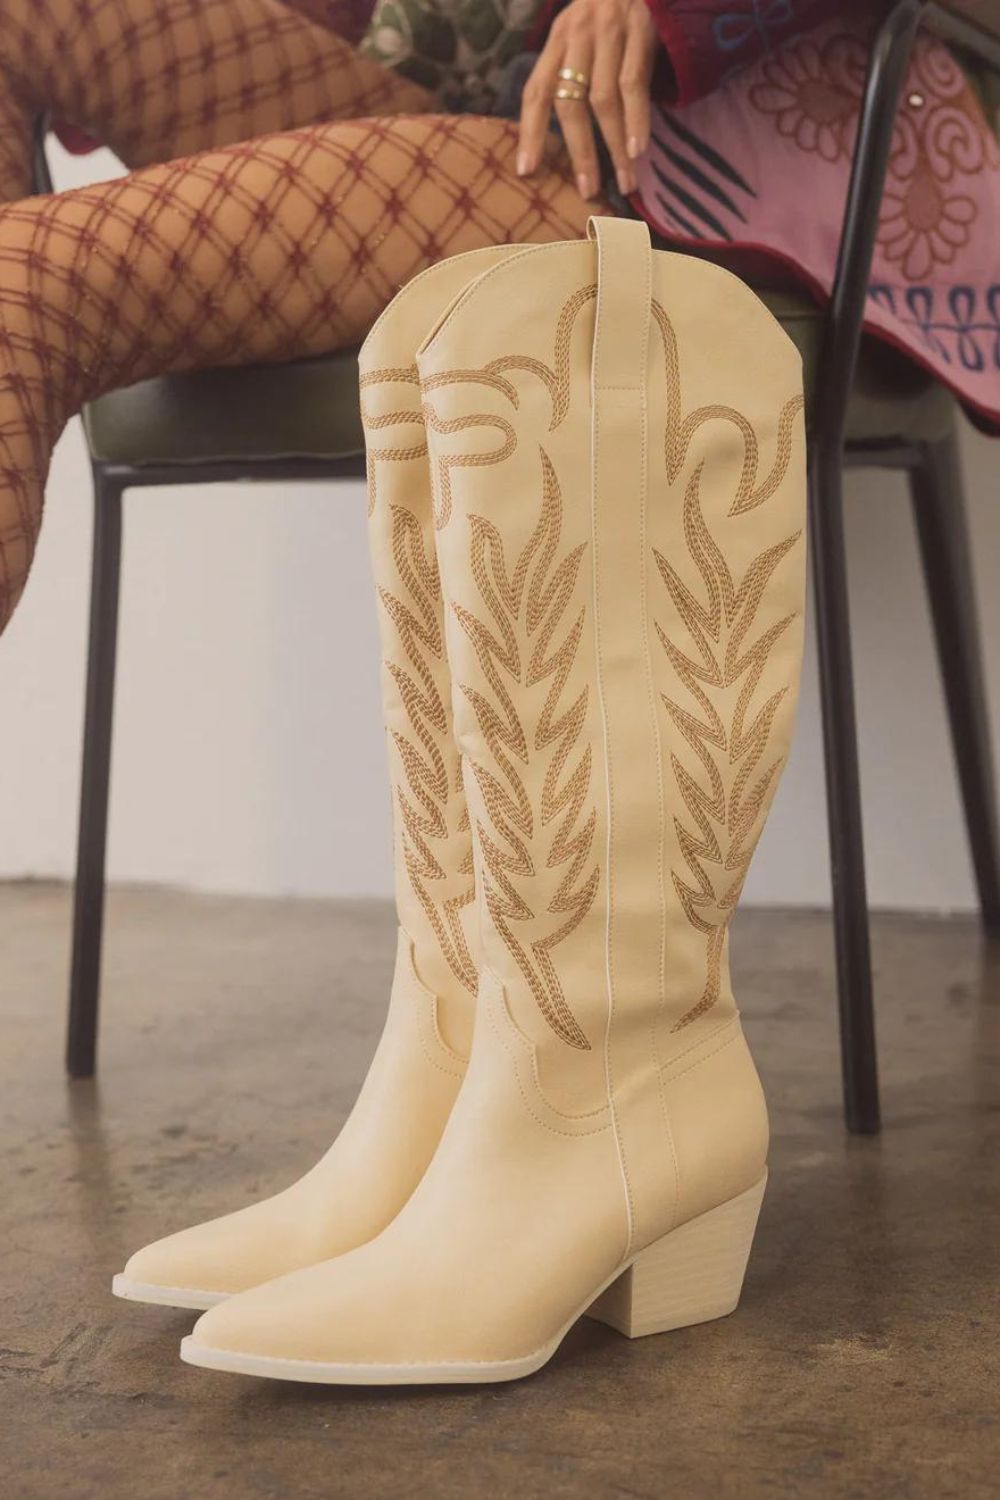 Coastal Cowgirl Boots | Bohemian Western | Knee High | Cream - Women's Boots - Blooming Daily